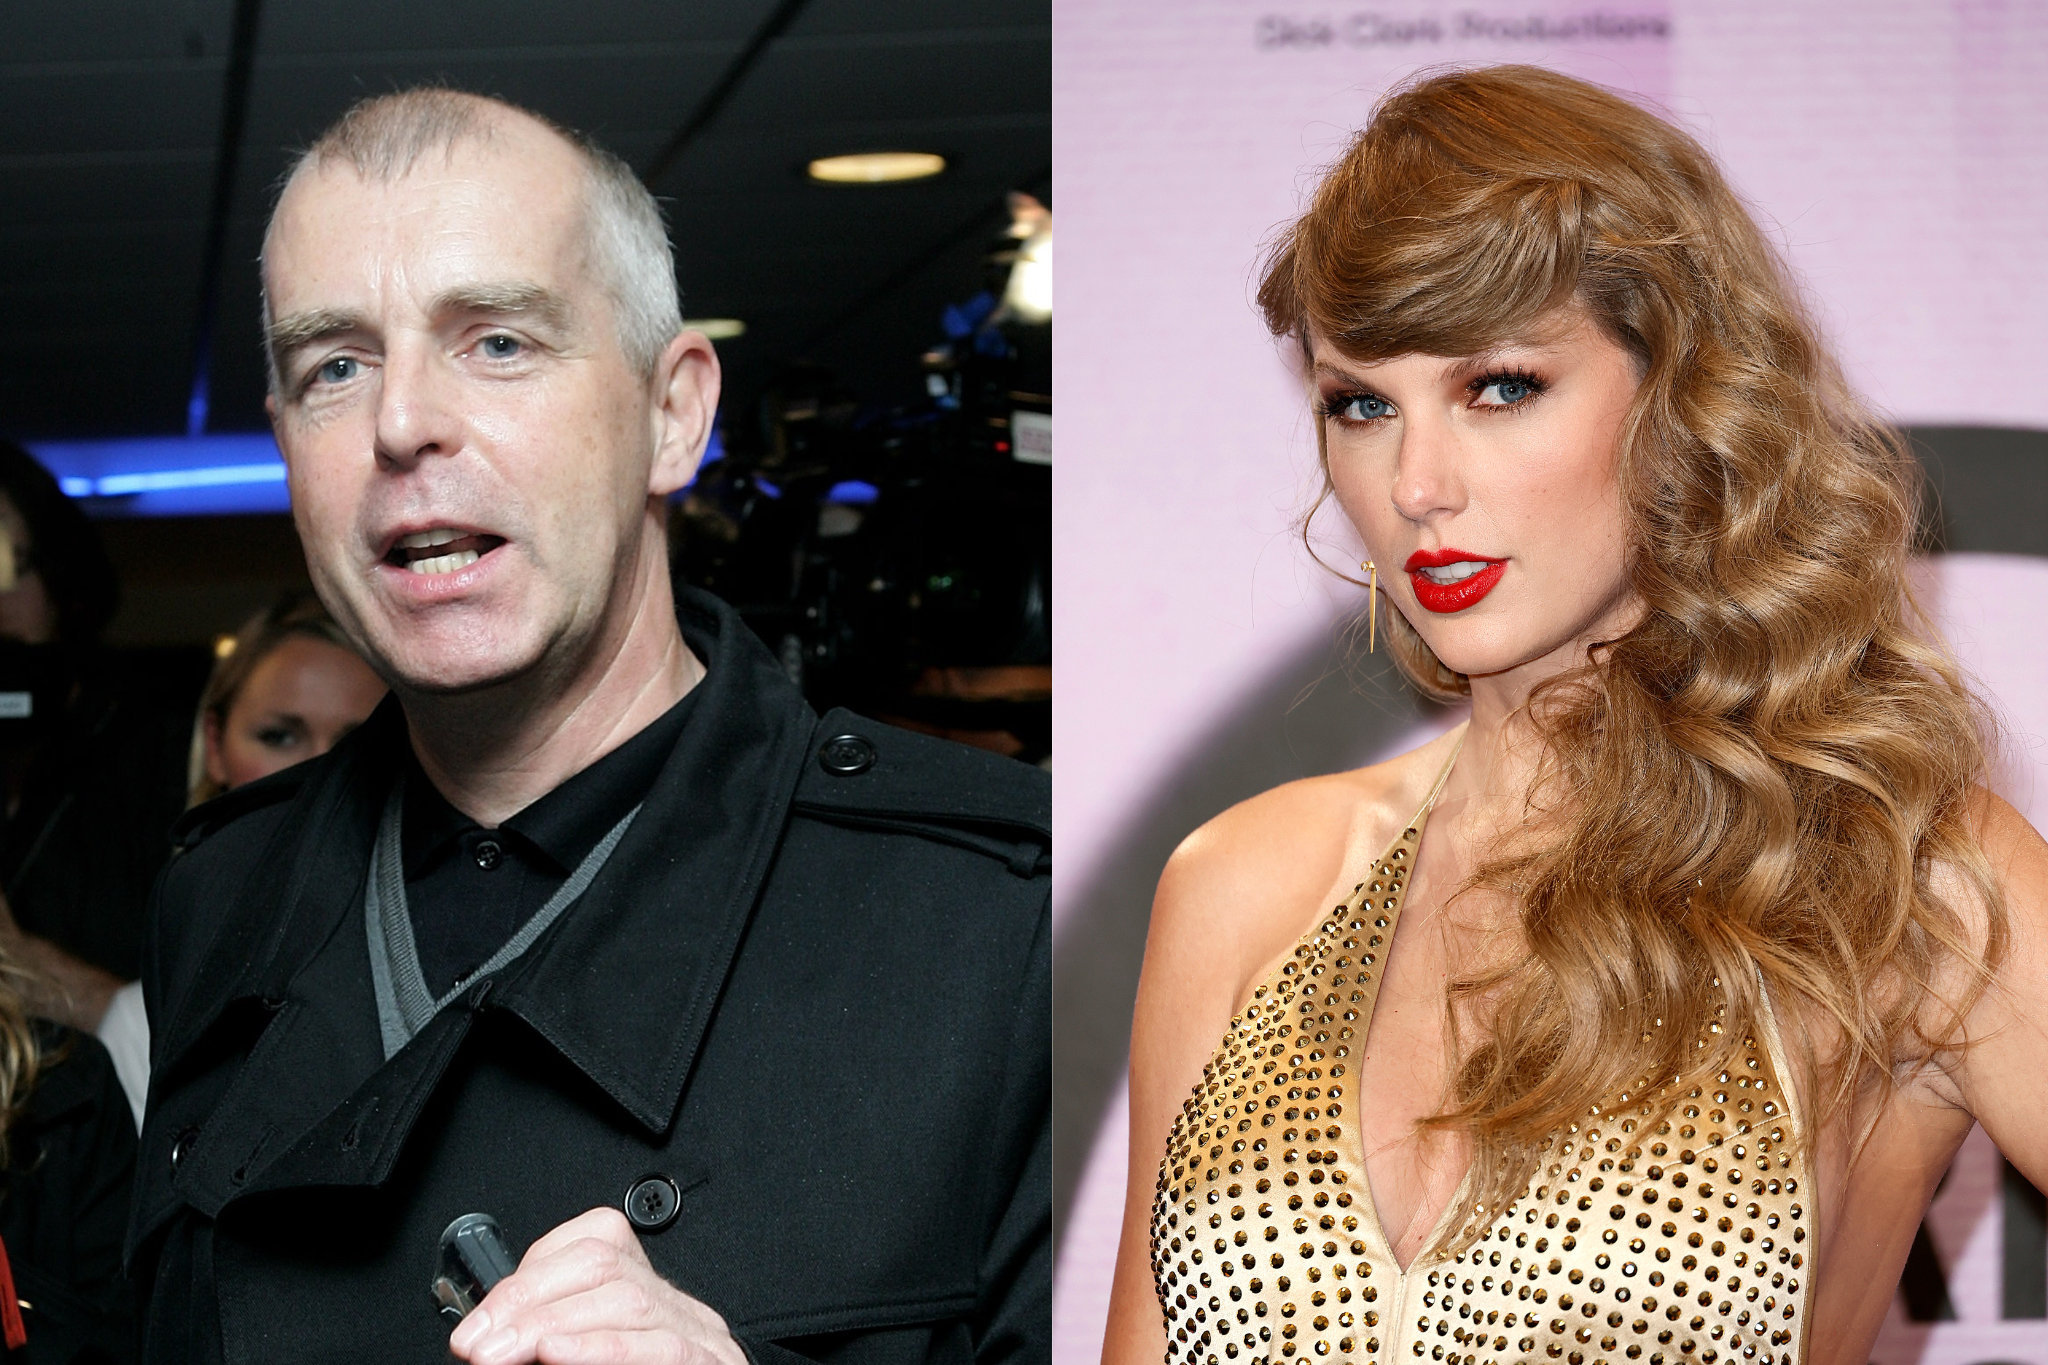 Neil Tennant of Pet Shop Boys and Taylor Swift